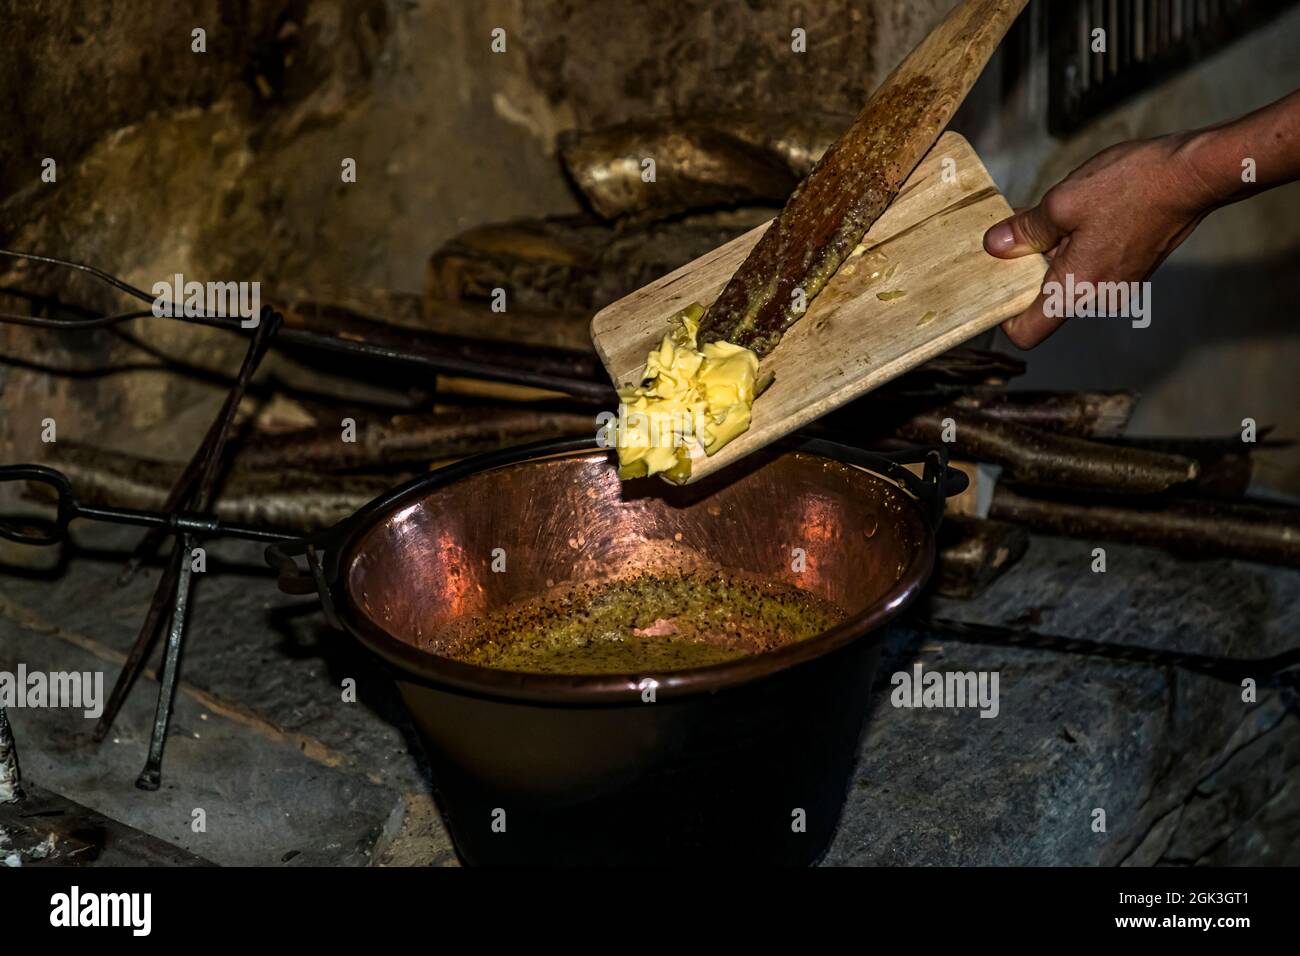 In Cerentino, visitors can stay in the lavishly renovated historic patrician house Cà Vegia, with centuries-old original furnishings but without electricity. Polenta is prepared over the open fire, Circolo della Rovana, Switzerland Stock Photo